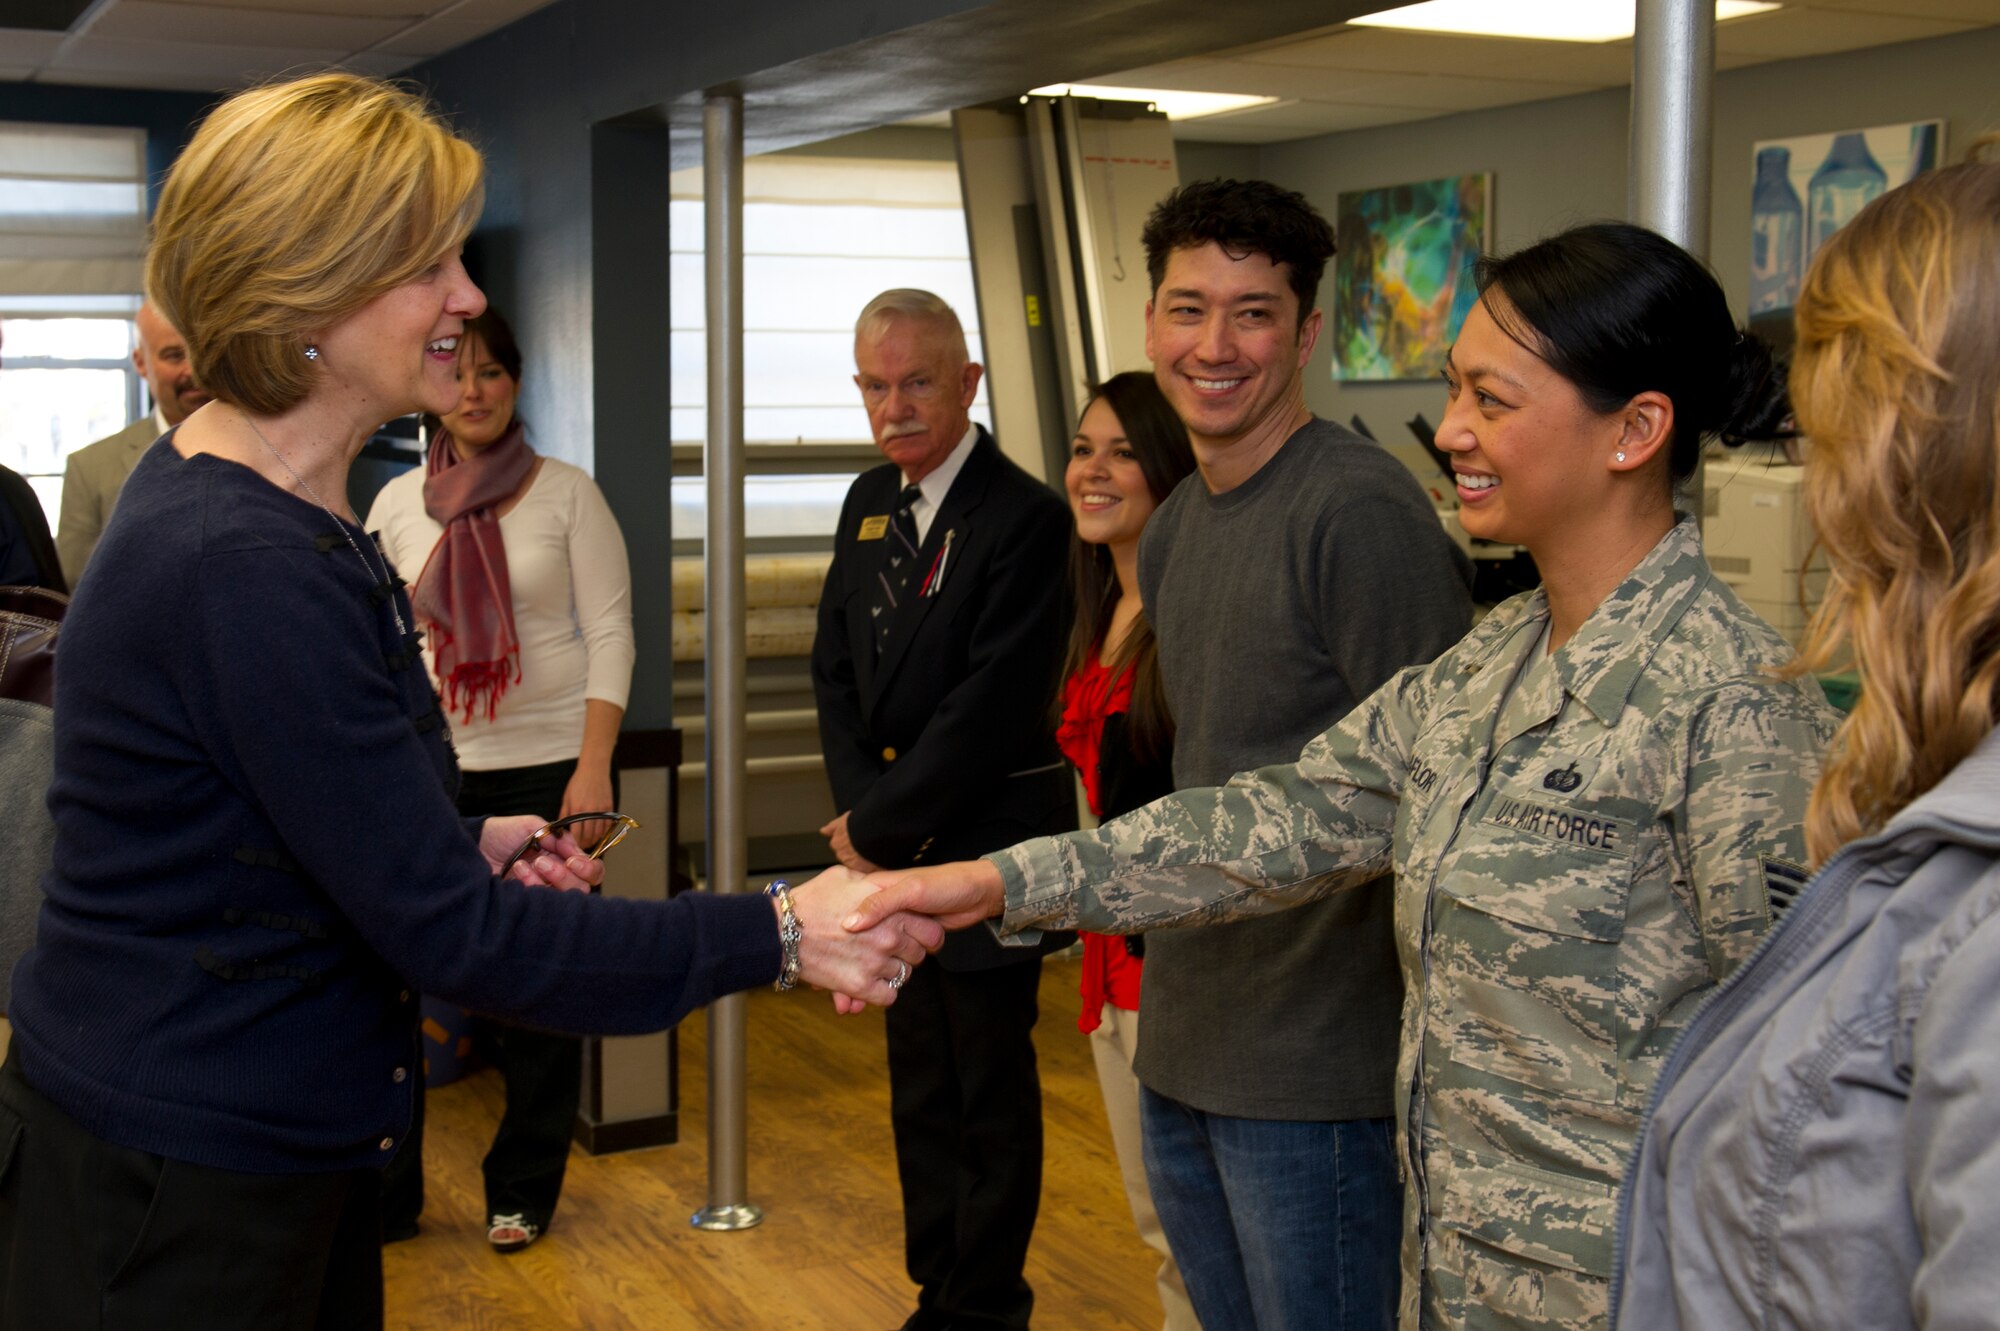 HOLLOMAN AIR FORCE BASE, N.M. -- Kim Rand, wife of U.S. Air Force Lt. Gen. Robin Rand, 12th Air Force commander, shakes hands with Tech. Sgt. Michelle Villaflor, 49th Force Support Squadron marketing assistant, Jan. 19, at the Marketing Office. Rand accompanied her husband on his first trip to Holloman and visited with different base agencies. (U.S. Air Force photo by Senior Airman Kasey Close/Released)